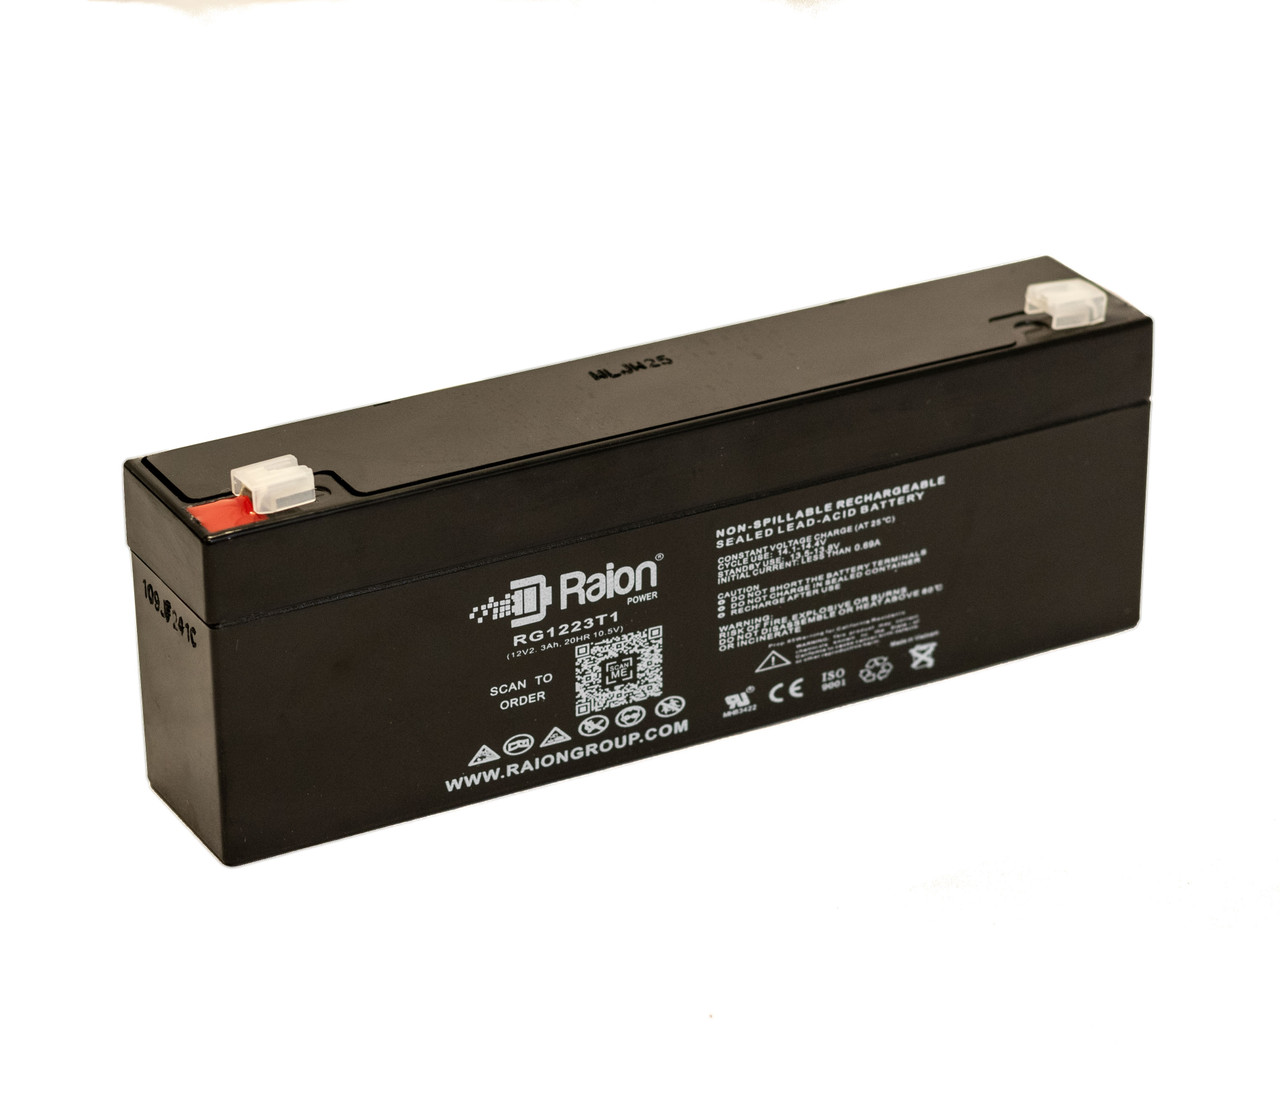 Raion Power RG1223T1 Replacement Battery for Criticare Systems Poet TE602